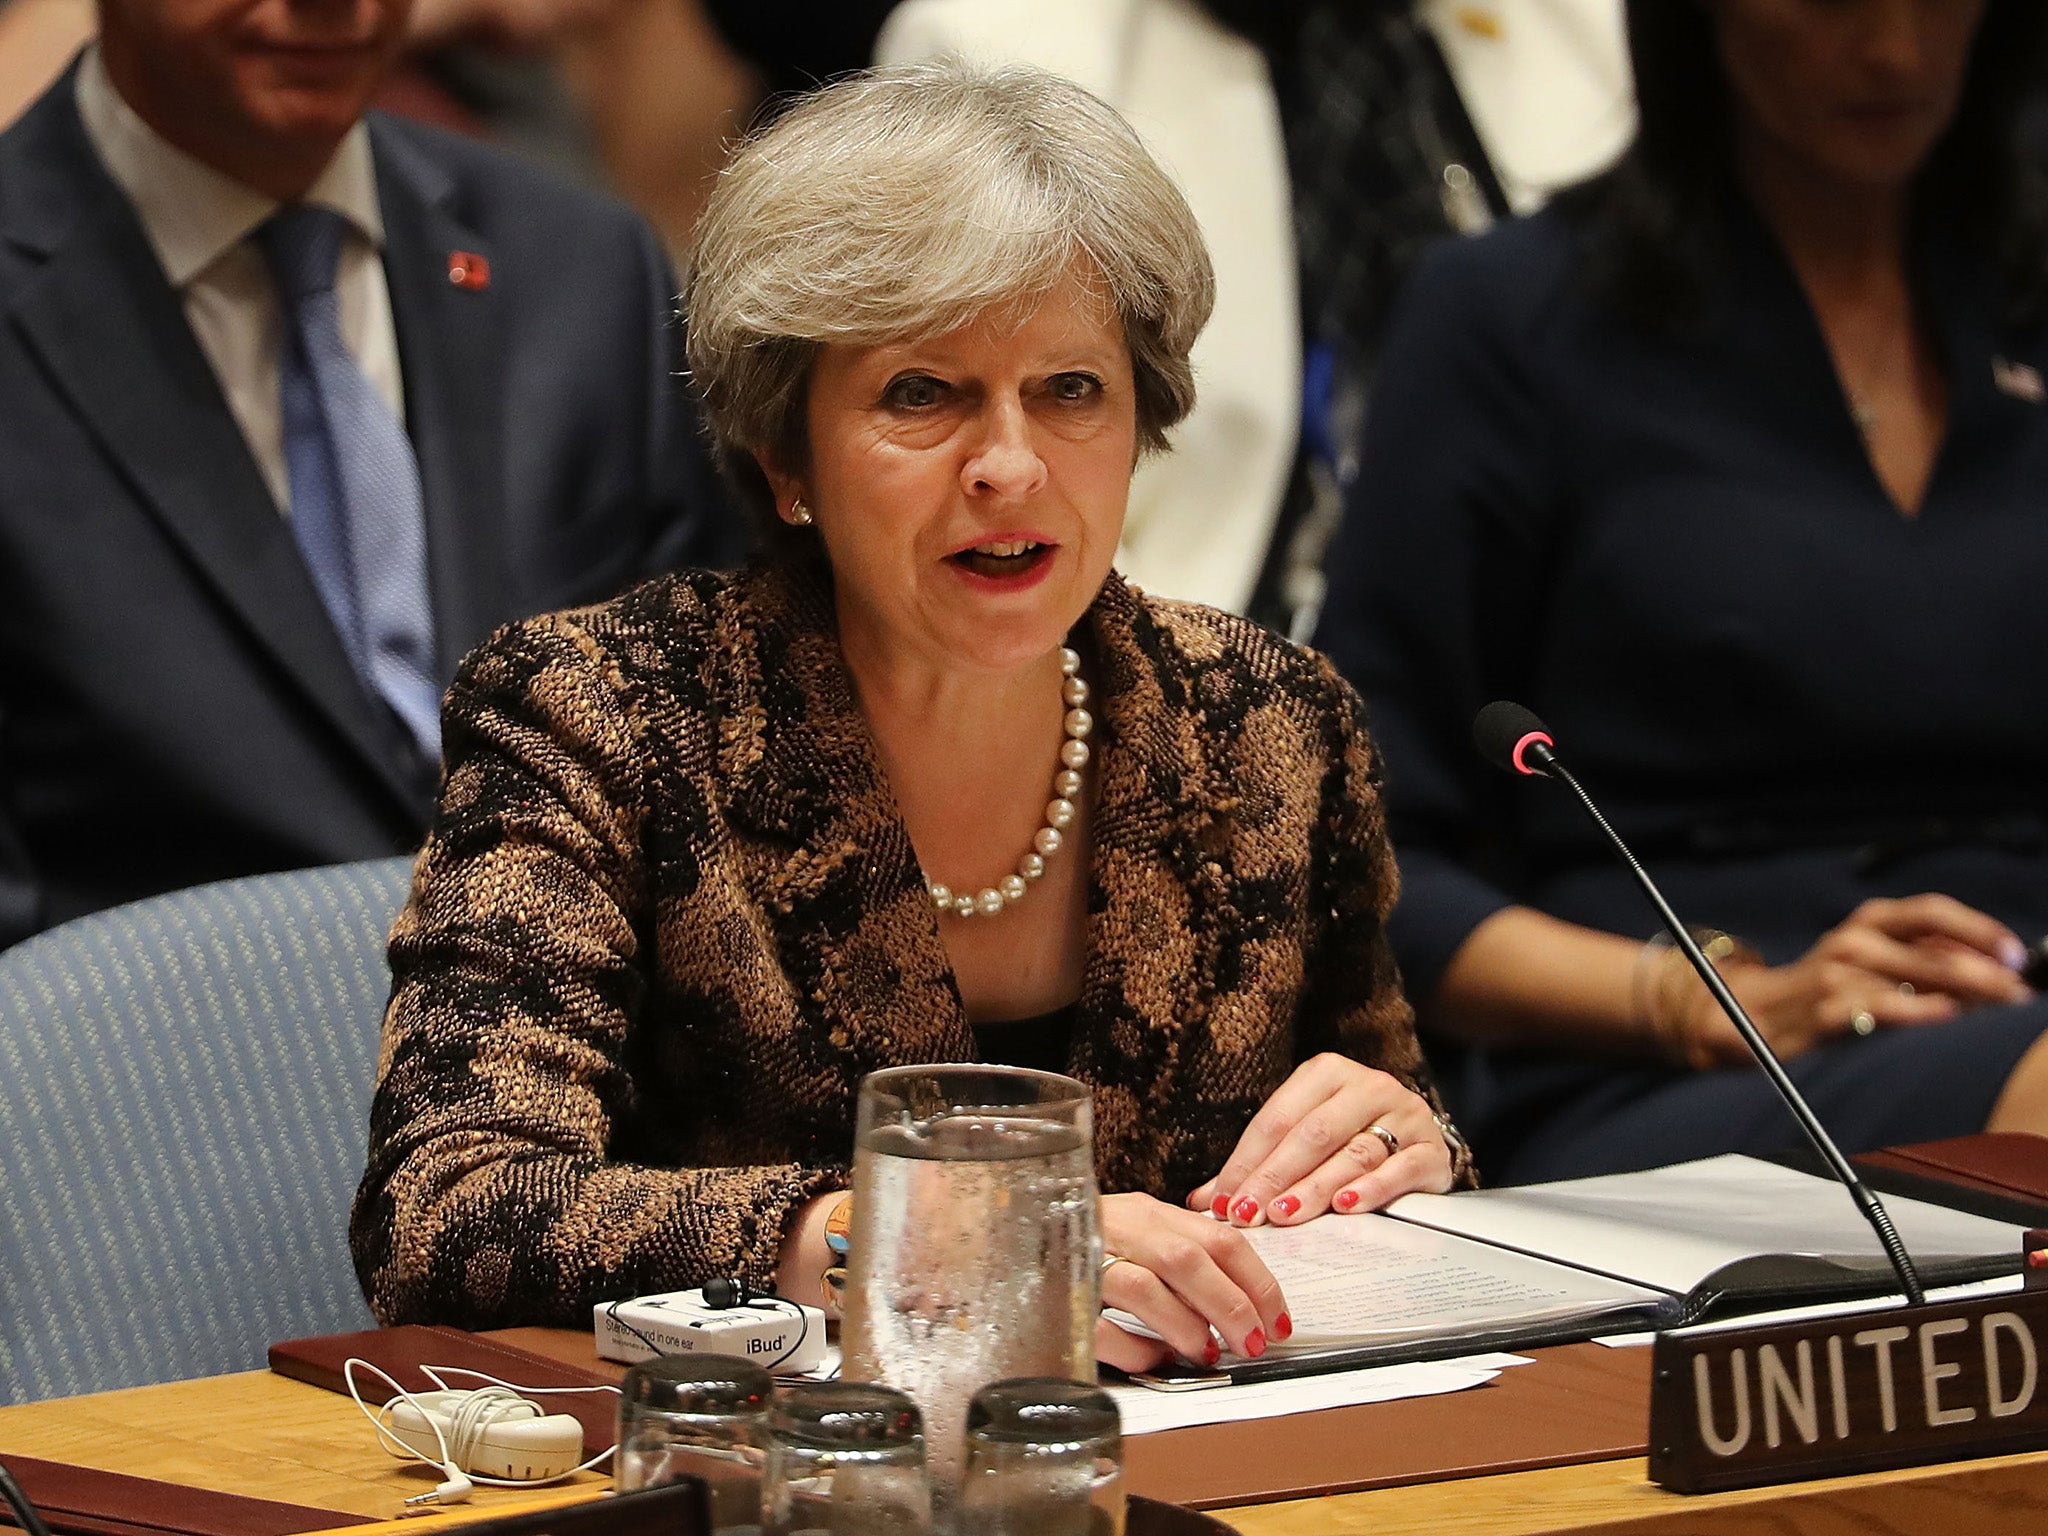 Theresa May speaks at a Security Council meeting in New York